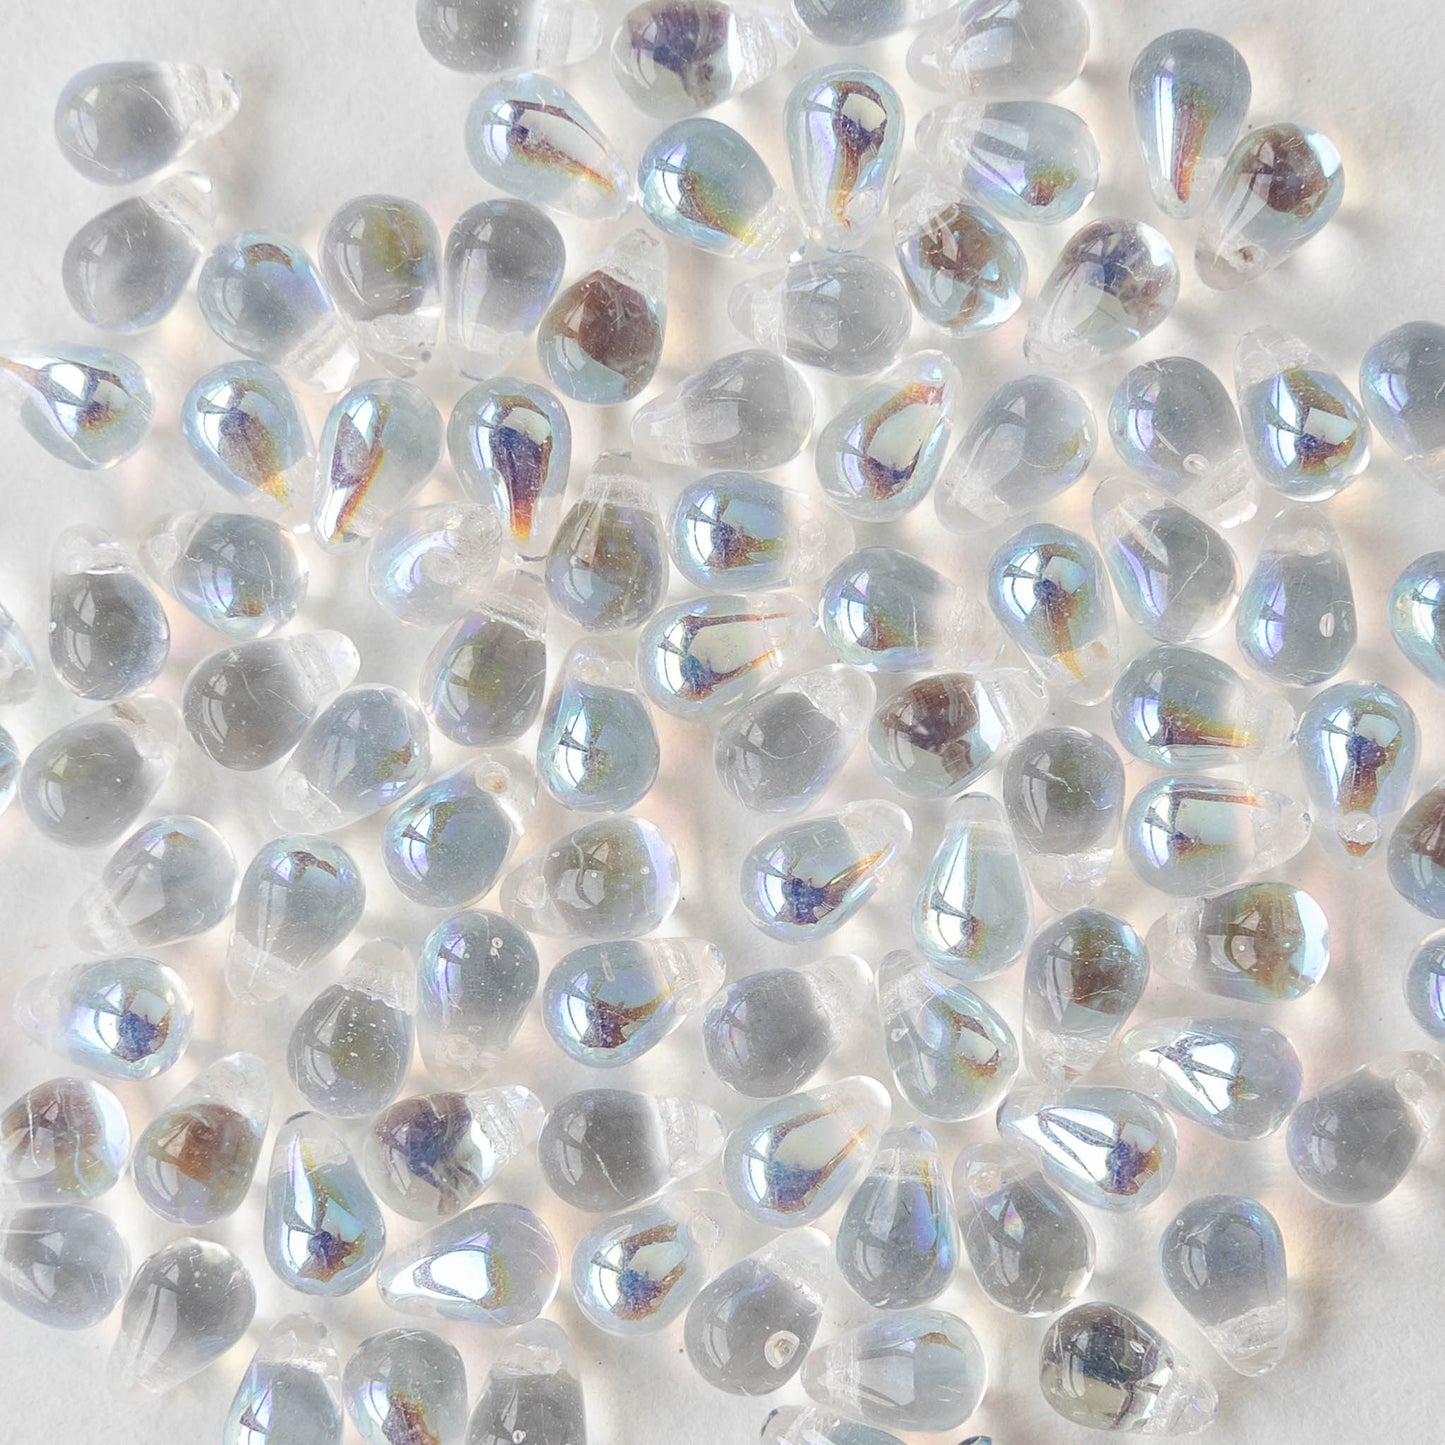 Load image into Gallery viewer, 4x6mm Glass Teardrop Beads - Crystal AB - 100 Beads
